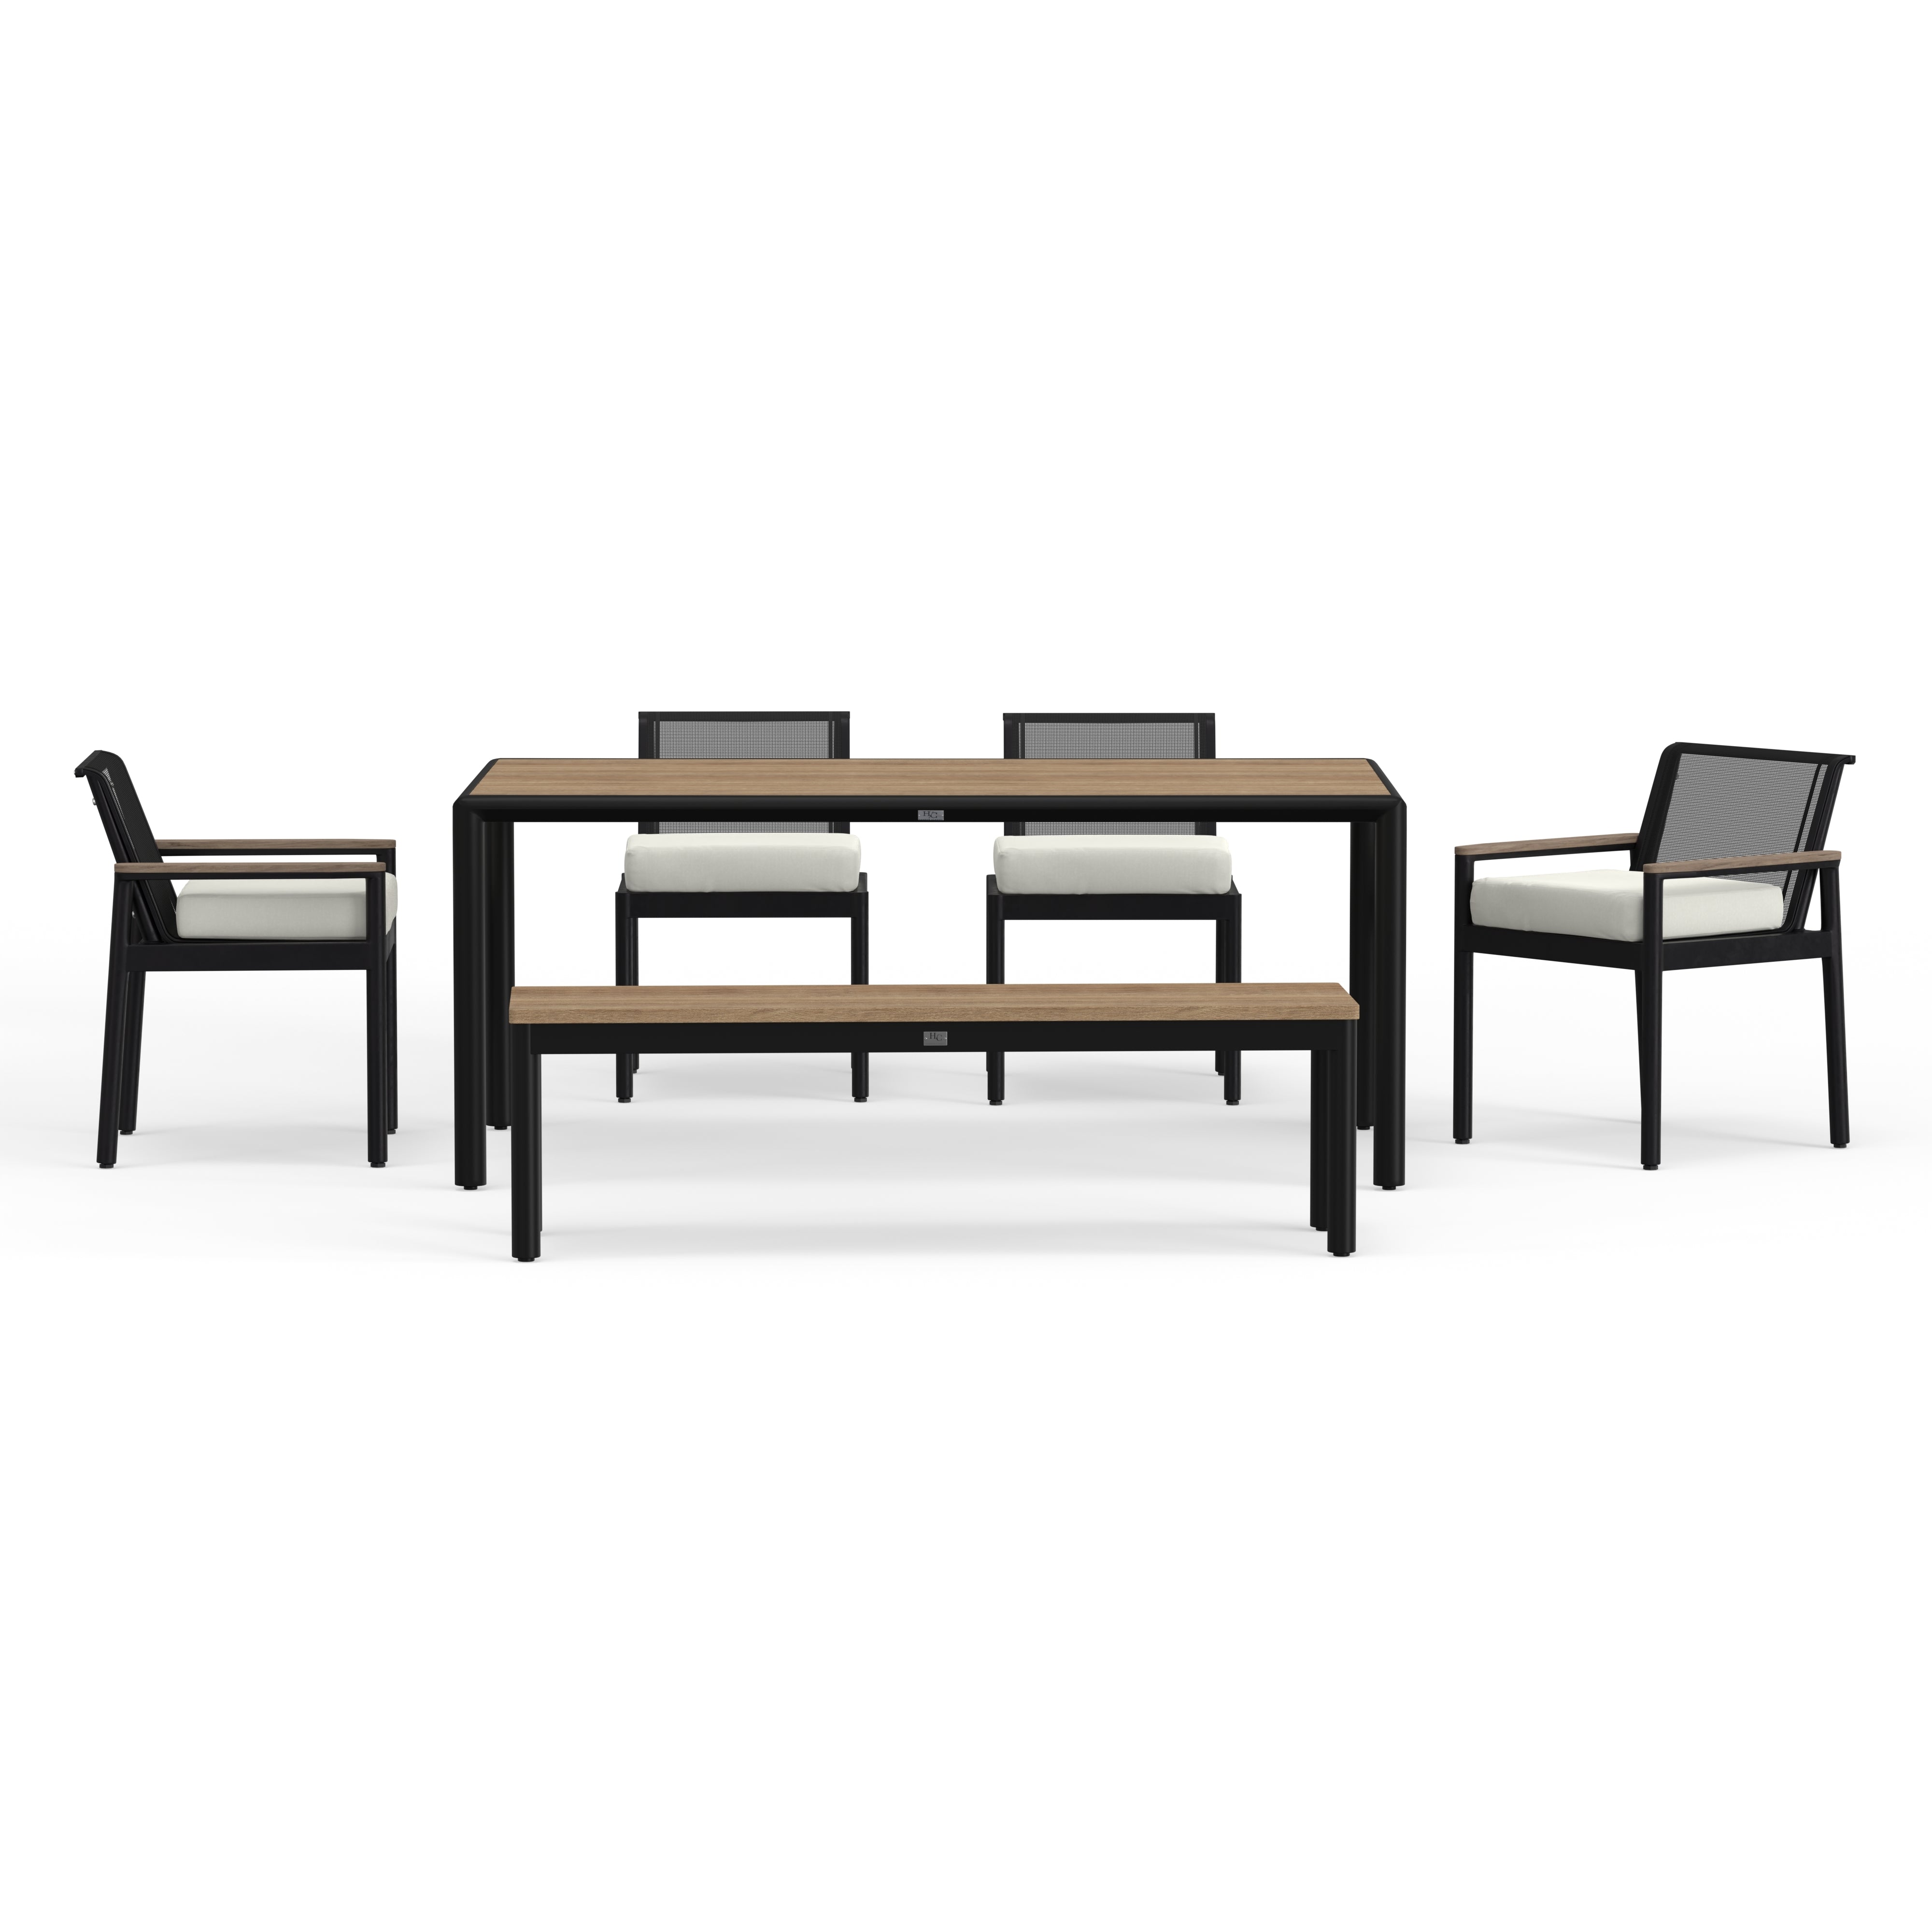 Black Aluminum Outdoor Dining Table That Will Last